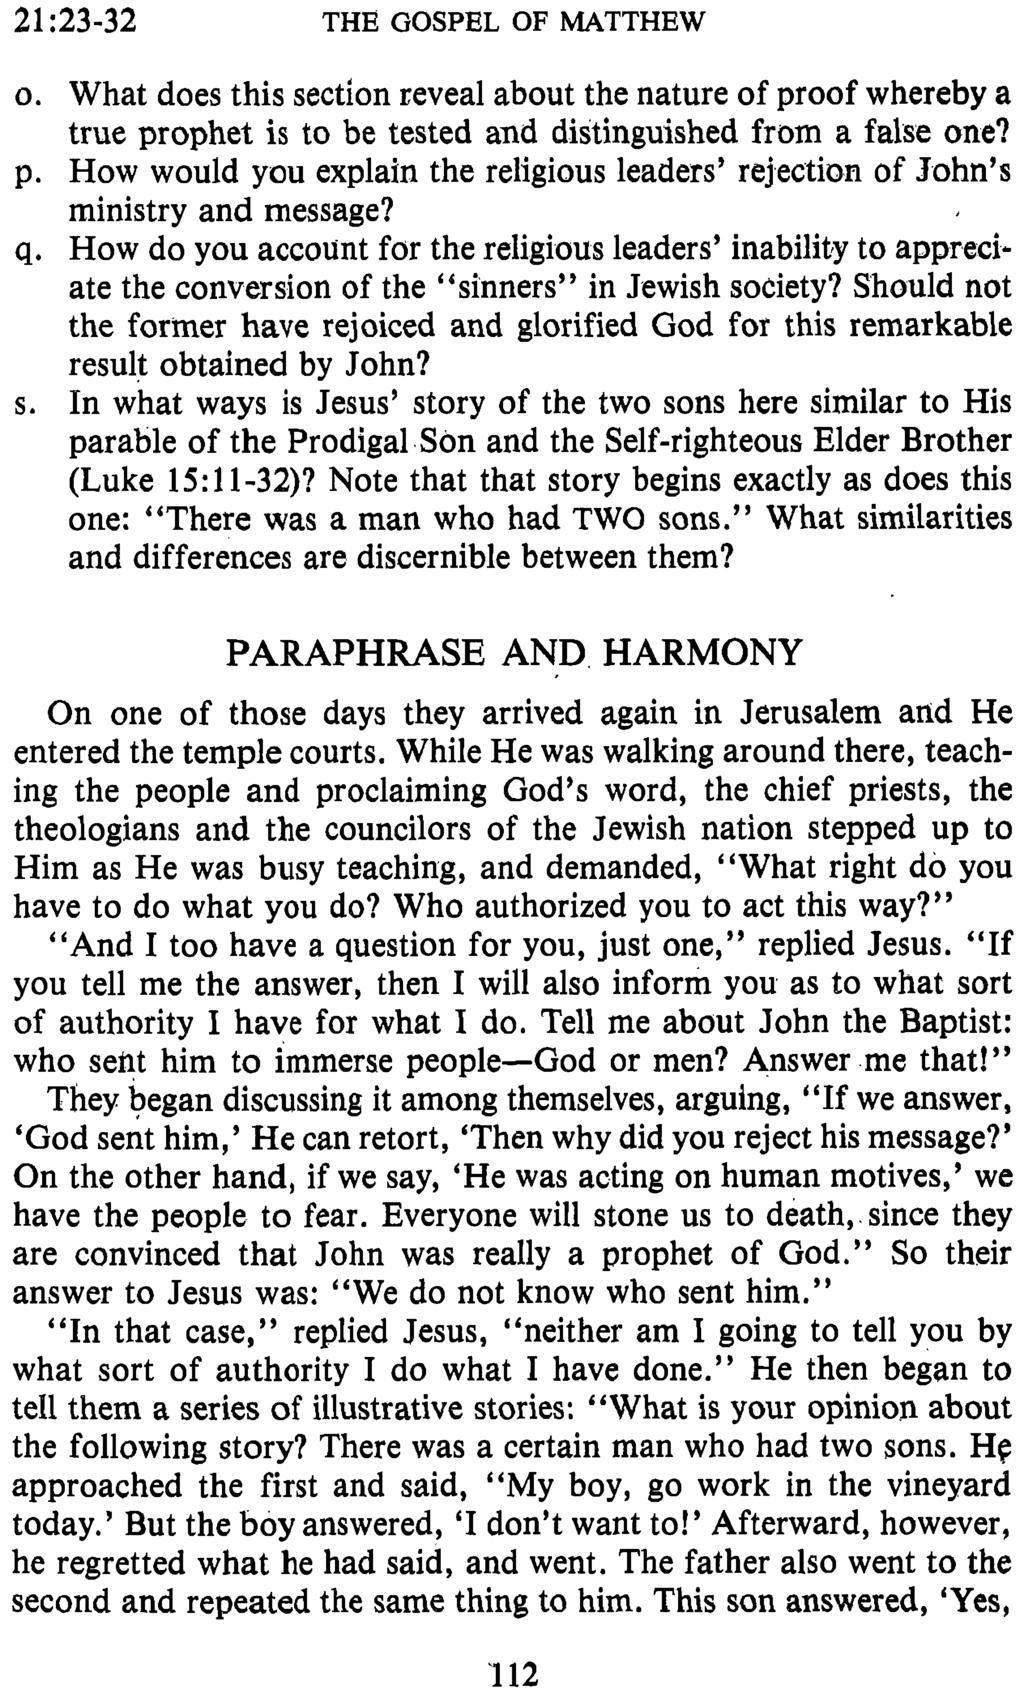 21 ~23-32 THE GOSPEL OF MATTHEW 0. What does this section zeveal about the nature of proof whereby a true prophet is to be tested and distinguished from a false one? p. How would you explain the religious leaders rejection of John s ministry and message?